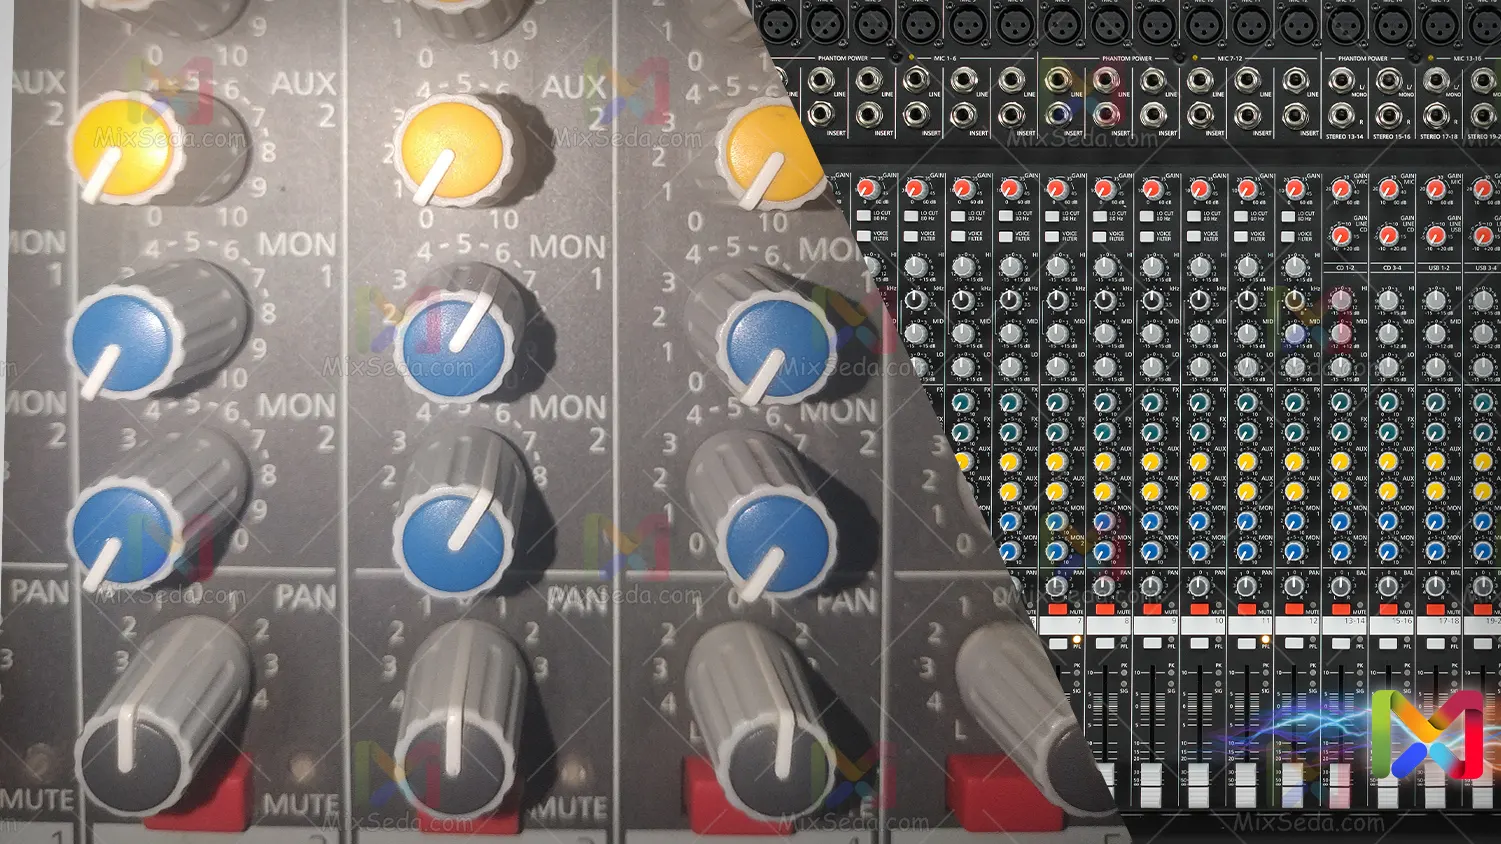 MON volumes in the Dynacord mixer